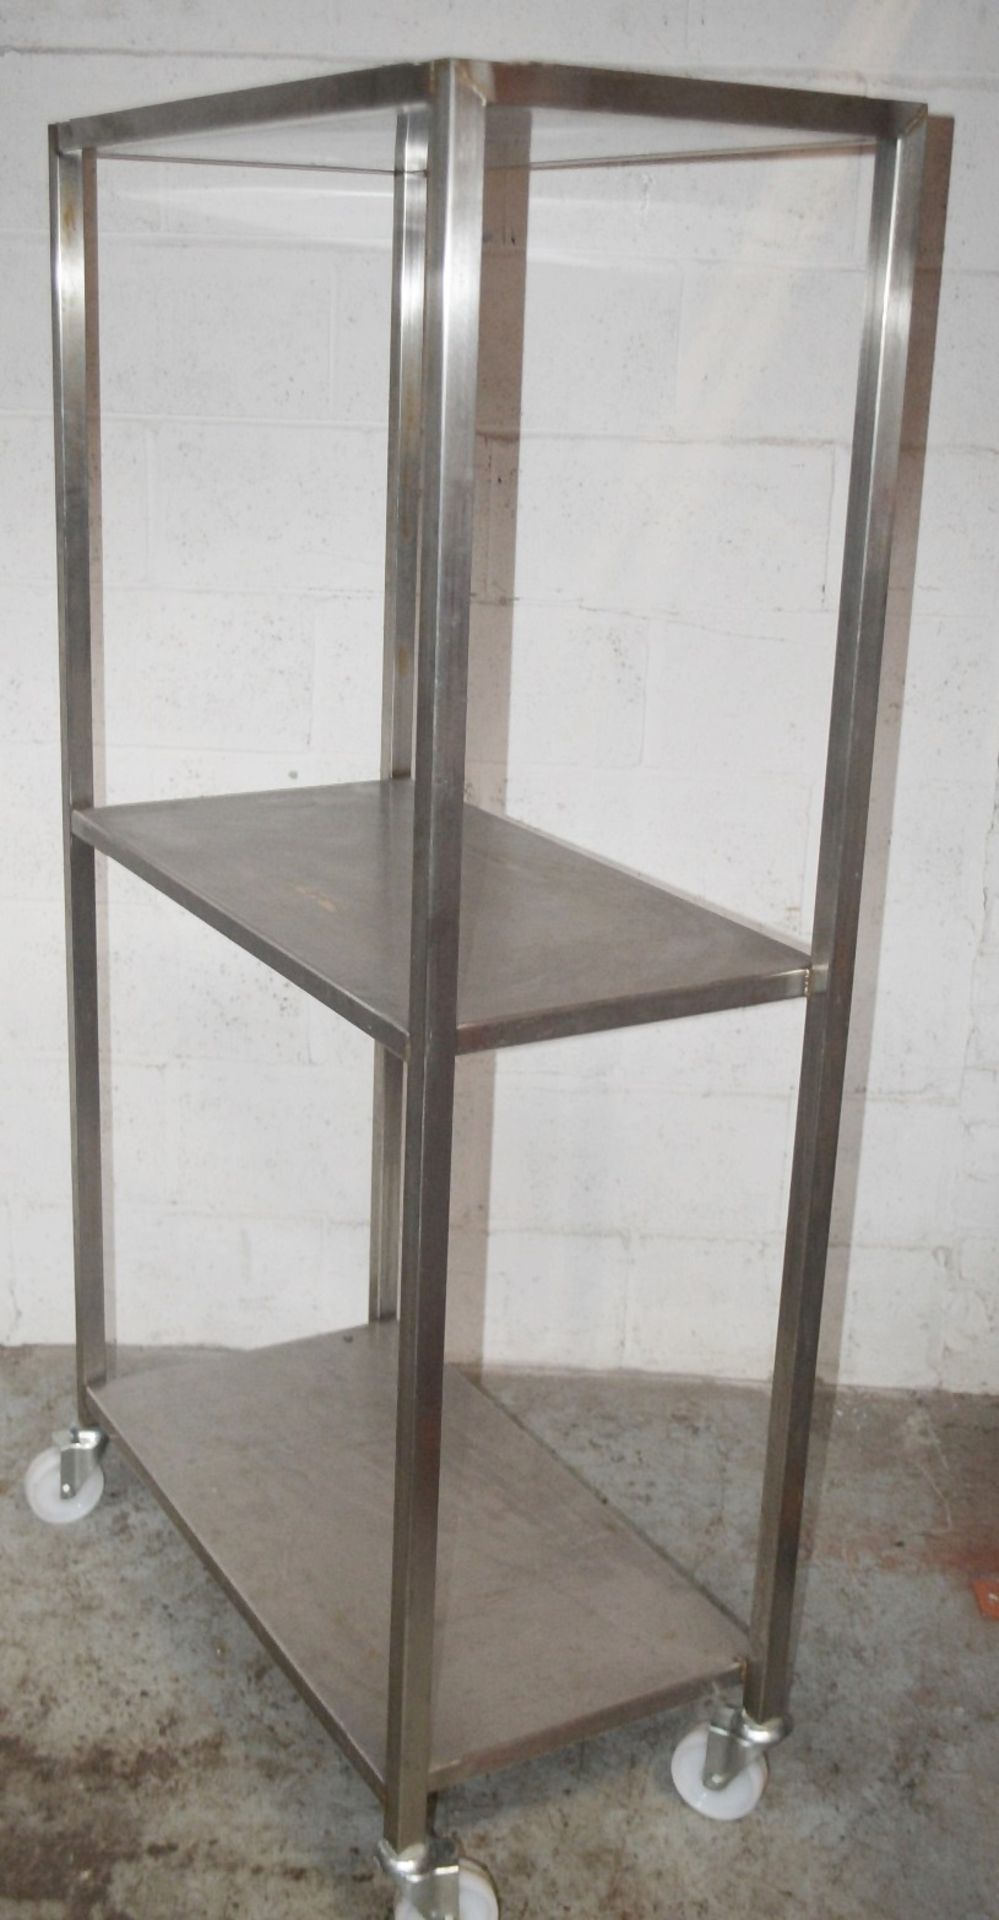 1 x Stainless Steel 1.7 Metre Tall Commercial Kitchen Trolley On Castors - Dimensions: H170 x W90 - Image 3 of 3